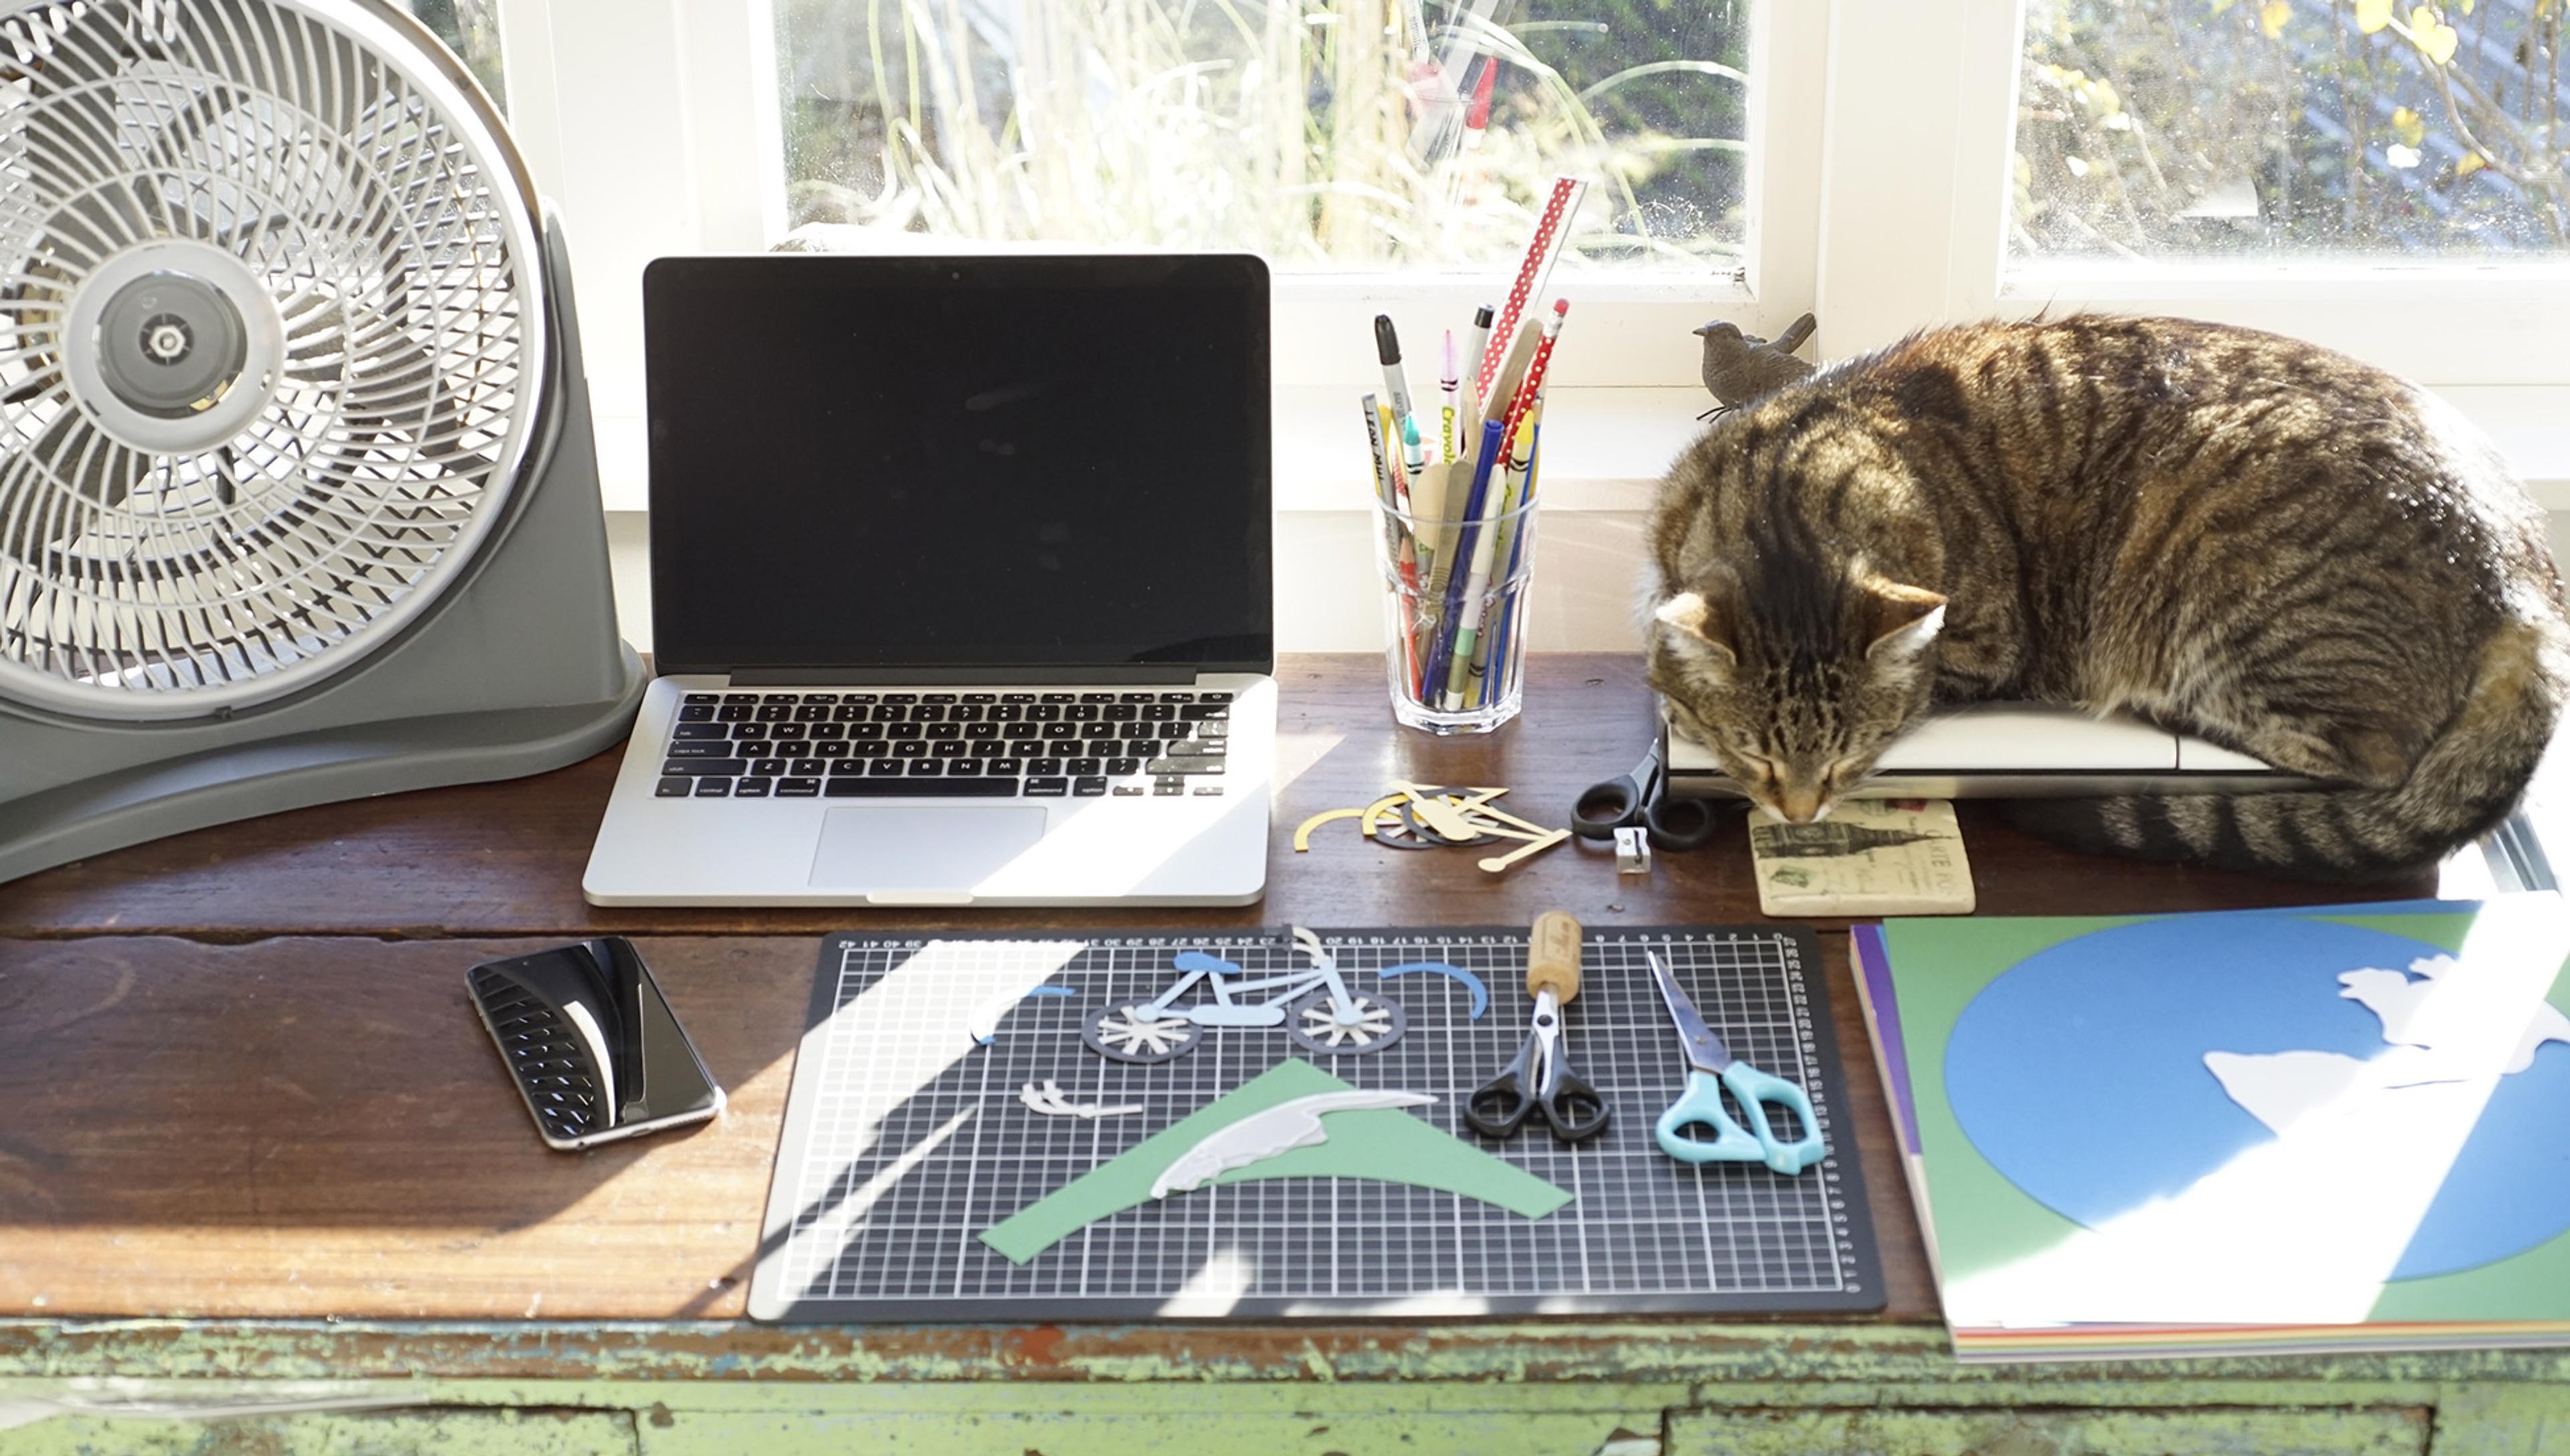 A tabby cat sleeps upon a home office desk next to a laptop and various desk items